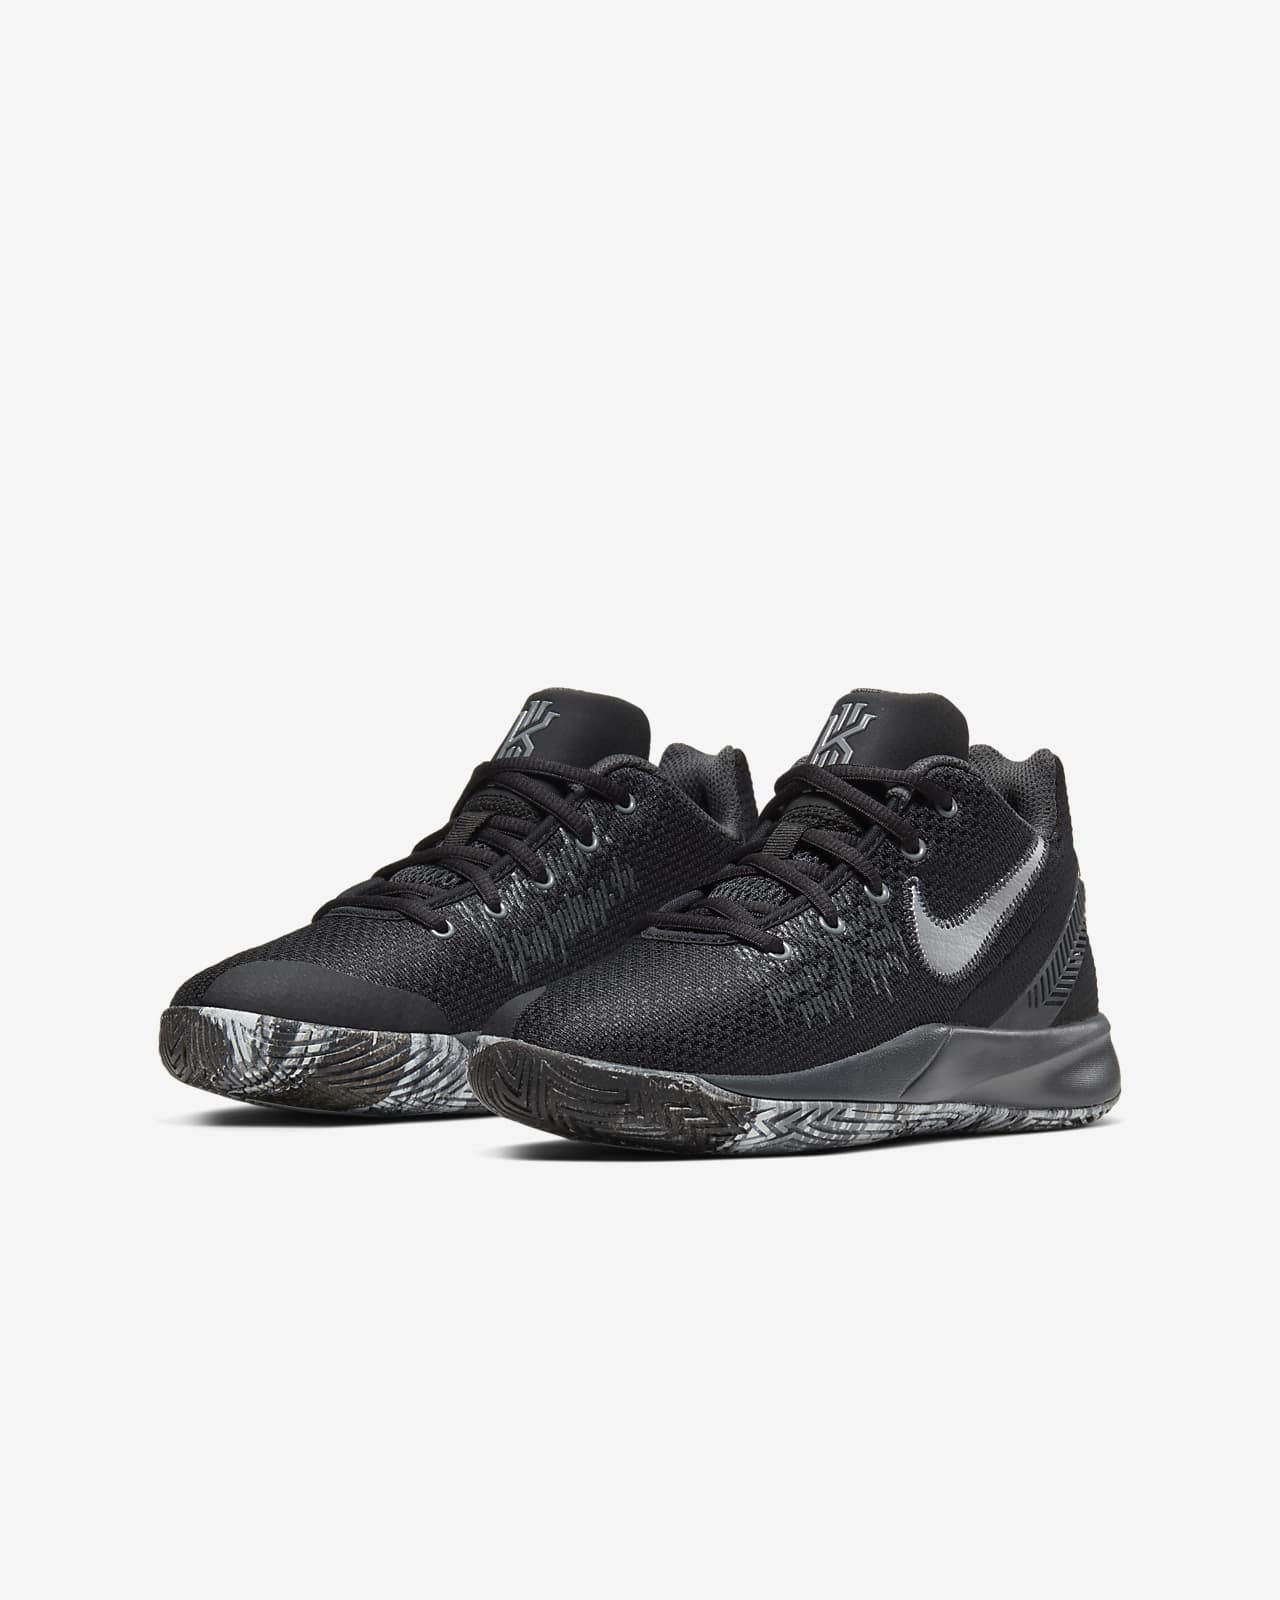 nike kyrie flytrap 2 price philippines